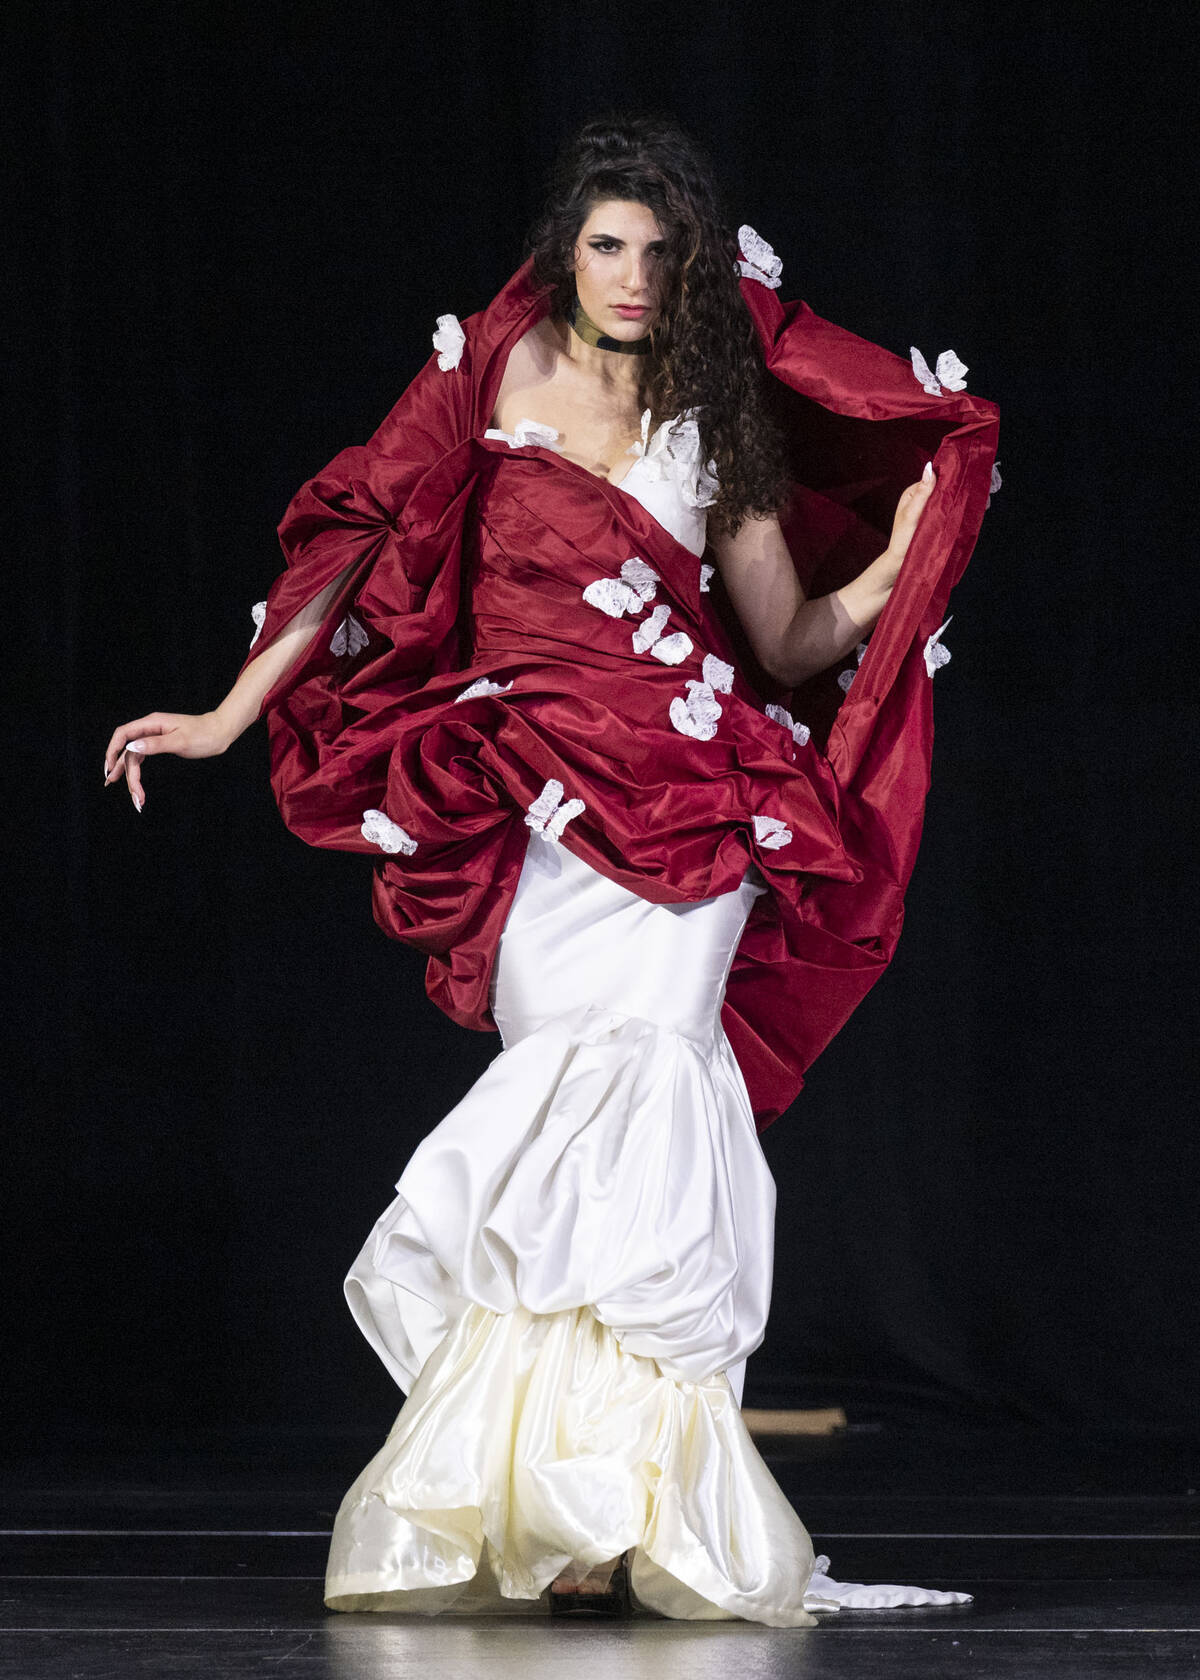 Lunar gala model wearing red and white dress with shoulder accents